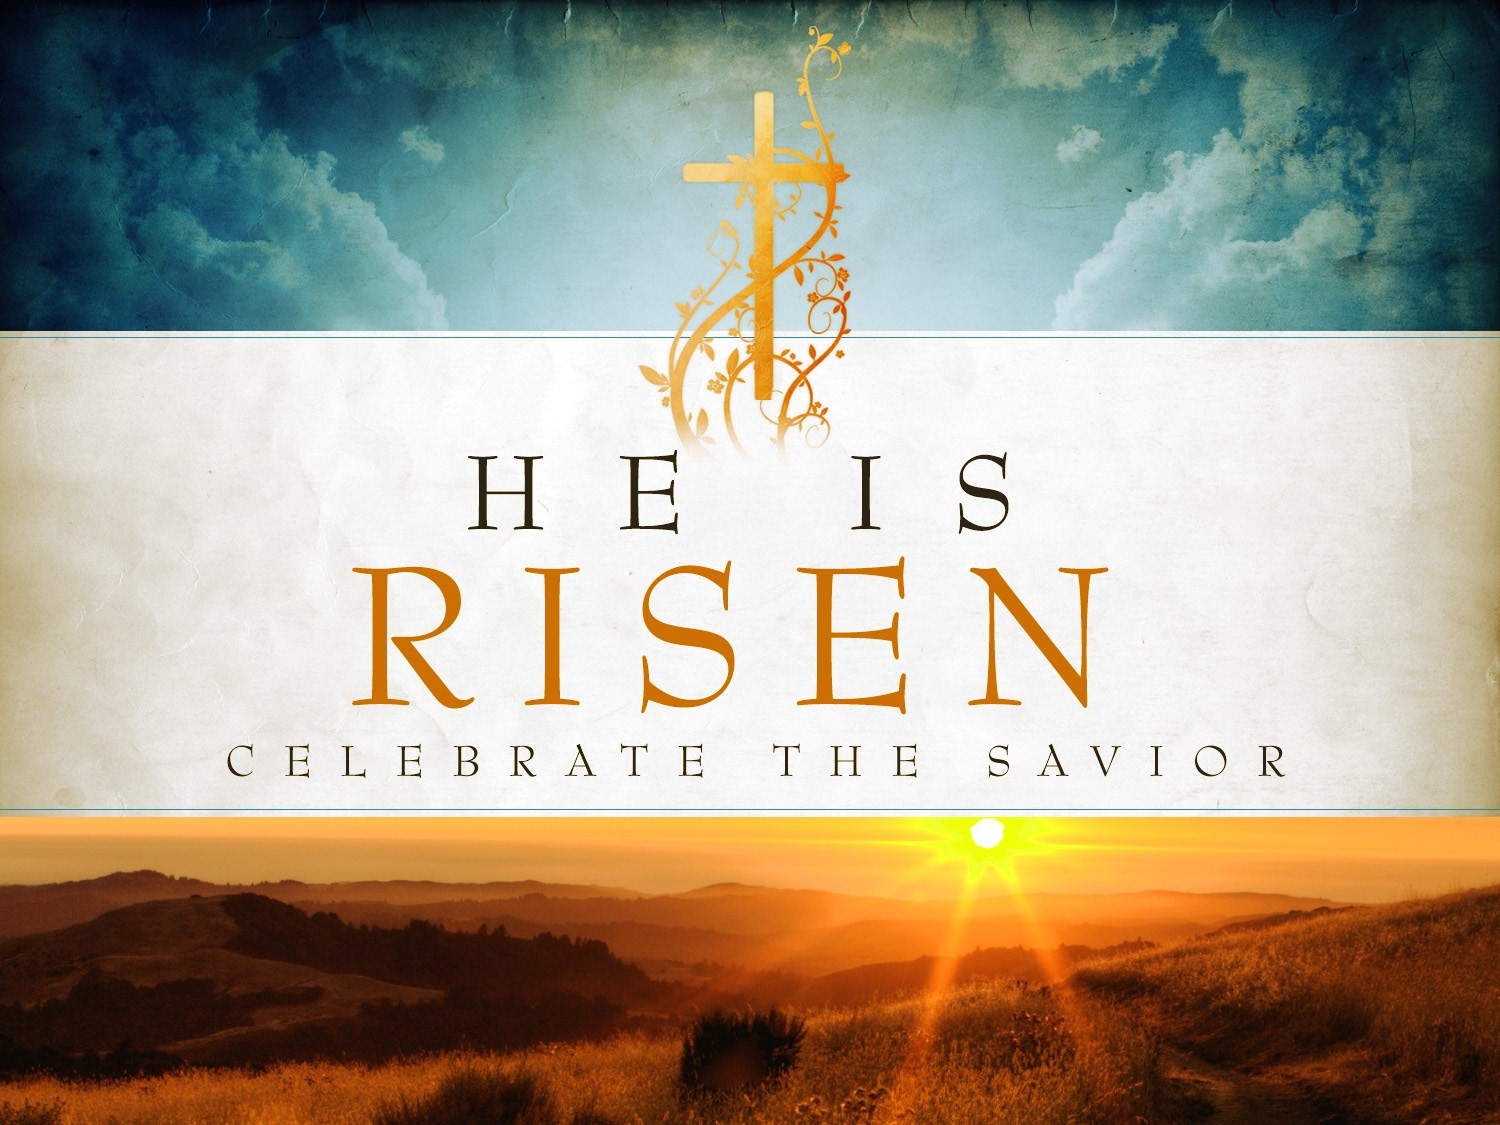 Bible Quotes About Easter
 25 Inspiring Happy Easter Quotes From The Bible